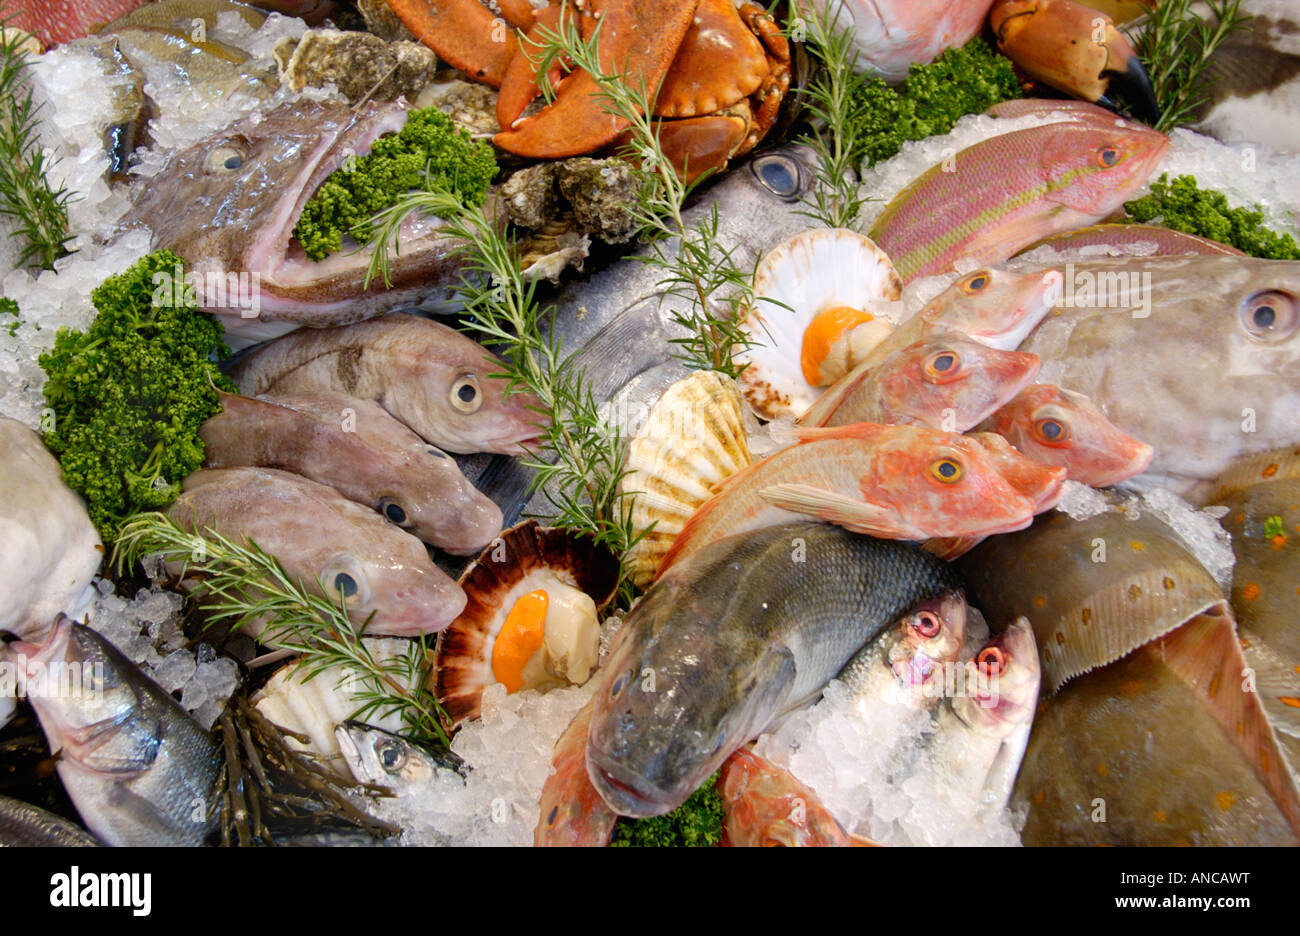 Selection of sea fish for sale at Abergavenny Food Festival Monmouthshire South Wales UK EU Stock Photo